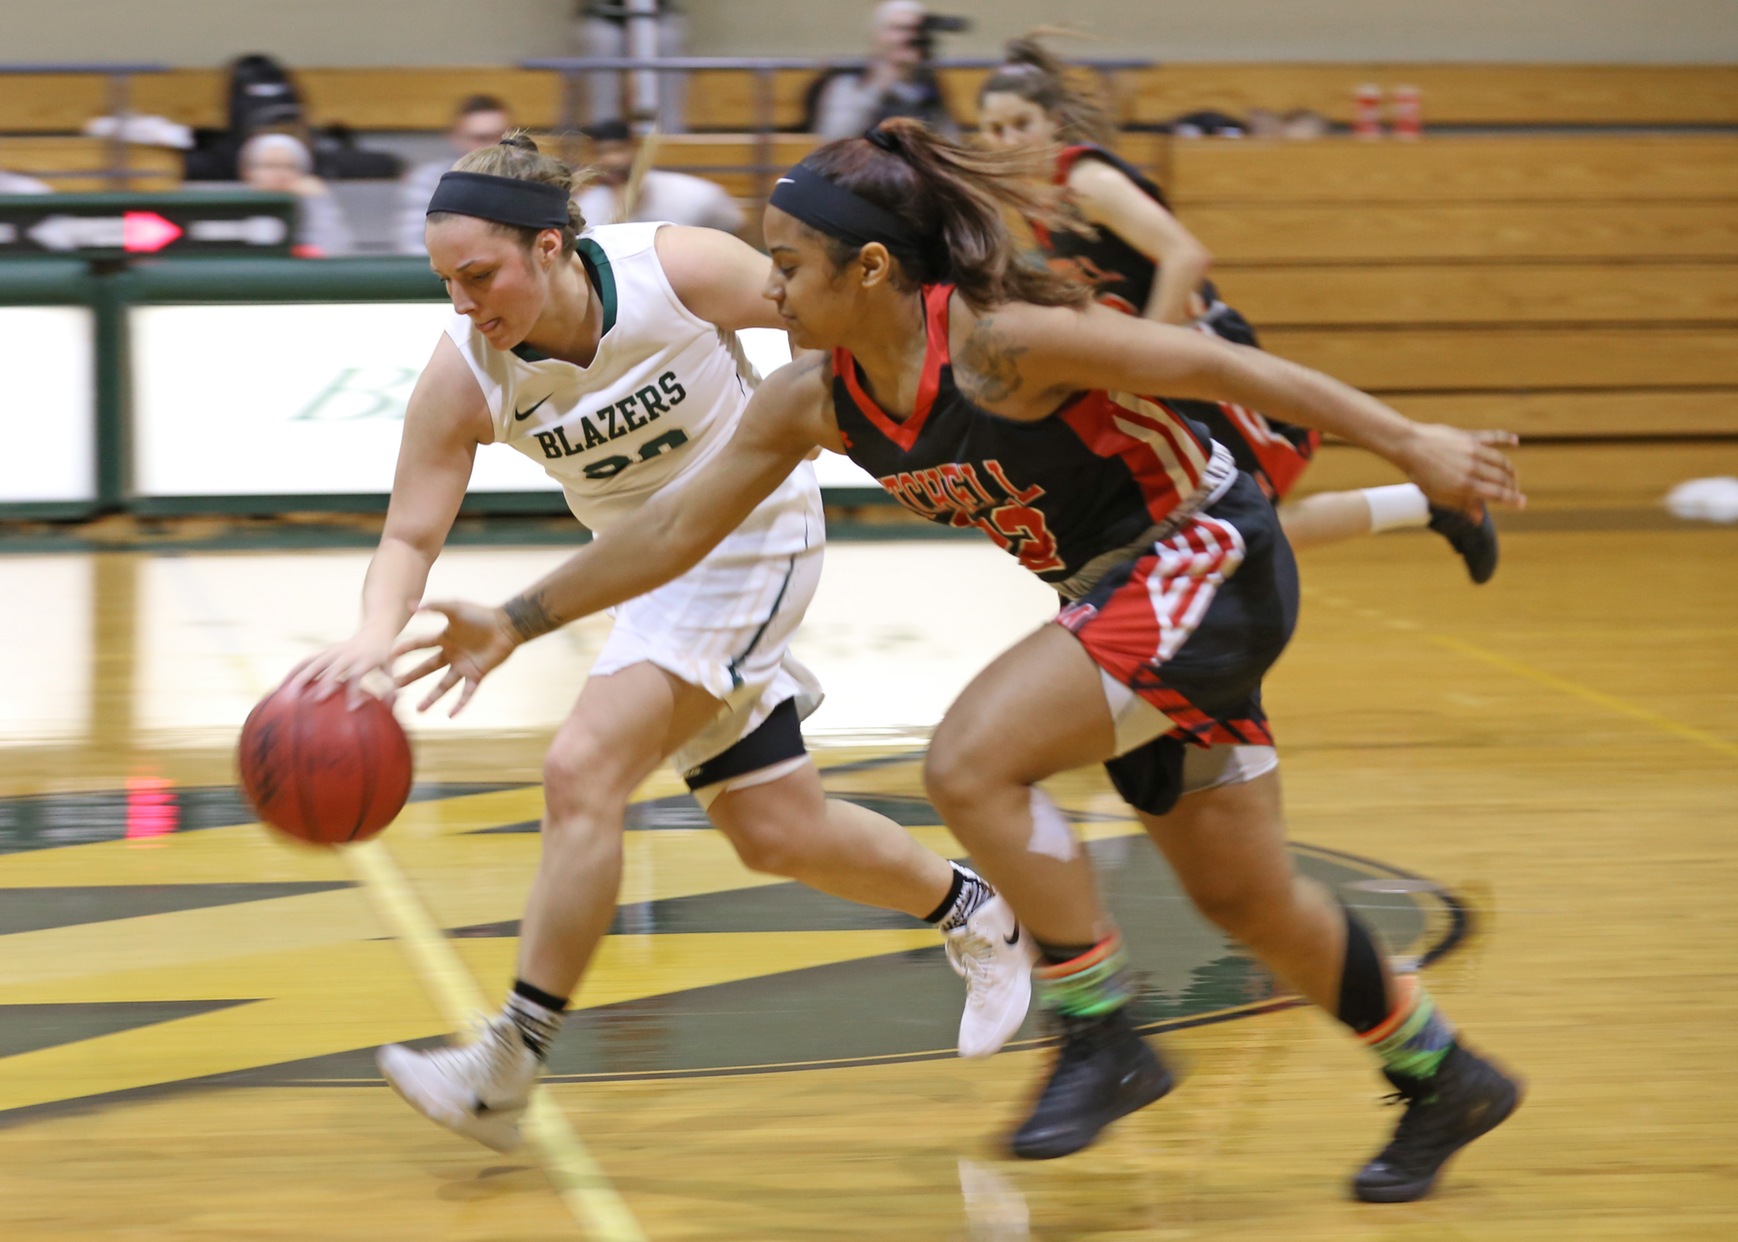 Women's Basketball Runs Out Of Time At Dean